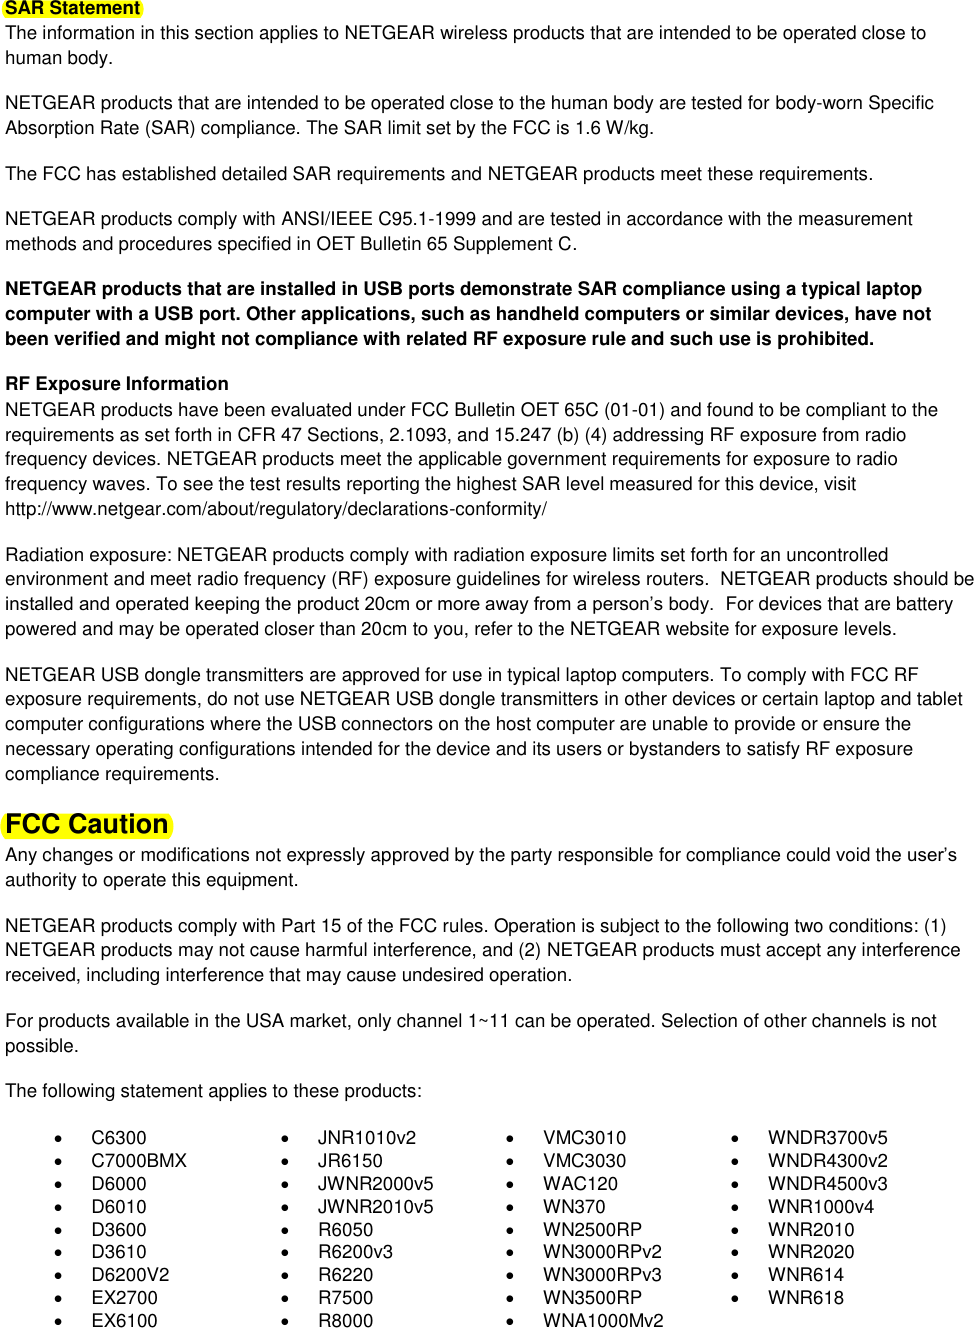  SAR Statement The information in this section applies to NETGEAR wireless products that are intended to be operated close to human body.  NETGEAR products that are intended to be operated close to the human body are tested for body-worn Specific Absorption Rate (SAR) compliance. The SAR limit set by the FCC is 1.6 W/kg. The FCC has established detailed SAR requirements and NETGEAR products meet these requirements. NETGEAR products comply with ANSI/IEEE C95.1-1999 and are tested in accordance with the measurement methods and procedures specified in OET Bulletin 65 Supplement C. NETGEAR products that are installed in USB ports demonstrate SAR compliance using a typical laptop computer with a USB port. Other applications, such as handheld computers or similar devices, have not been verified and might not compliance with related RF exposure rule and such use is prohibited. RF Exposure Information NETGEAR products have been evaluated under FCC Bulletin OET 65C (01-01) and found to be compliant to the requirements as set forth in CFR 47 Sections, 2.1093, and 15.247 (b) (4) addressing RF exposure from radio frequency devices. NETGEAR products meet the applicable government requirements for exposure to radio frequency waves. To see the test results reporting the highest SAR level measured for this device, visit http://www.netgear.com/about/regulatory/declarations-conformity/ Radiation exposure: NETGEAR products comply with radiation exposure limits set forth for an uncontrolled environment and meet radio frequency (RF) exposure guidelines for wireless routers.  NETGEAR products should be installed and operated keeping the product 20cm or more away from a person’s body.  For devices that are battery powered and may be operated closer than 20cm to you, refer to the NETGEAR website for exposure levels. NETGEAR USB dongle transmitters are approved for use in typical laptop computers. To comply with FCC RF exposure requirements, do not use NETGEAR USB dongle transmitters in other devices or certain laptop and tablet computer configurations where the USB connectors on the host computer are unable to provide or ensure the necessary operating configurations intended for the device and its users or bystanders to satisfy RF exposure compliance requirements.    FCC Caution Any changes or modifications not expressly approved by the party responsible for compliance could void the user’s authority to operate this equipment. NETGEAR products comply with Part 15 of the FCC rules. Operation is subject to the following two conditions: (1) NETGEAR products may not cause harmful interference, and (2) NETGEAR products must accept any interference received, including interference that may cause undesired operation. For products available in the USA market, only channel 1~11 can be operated. Selection of other channels is not possible. The following statement applies to these products:   C6300   JNR1010v2   VMC3010   WNDR3700v5   C7000BMX   JR6150   VMC3030   WNDR4300v2   D6000   JWNR2000v5   WAC120   WNDR4500v3   D6010   JWNR2010v5   WN370   WNR1000v4   D3600   R6050   WN2500RP   WNR2010   D3610   R6200v3   WN3000RPv2   WNR2020   D6200V2   R6220   WN3000RPv3   WNR614  EX2700   R7500   WN3500RP   WNR618   EX6100   R8000   WNA1000Mv2  